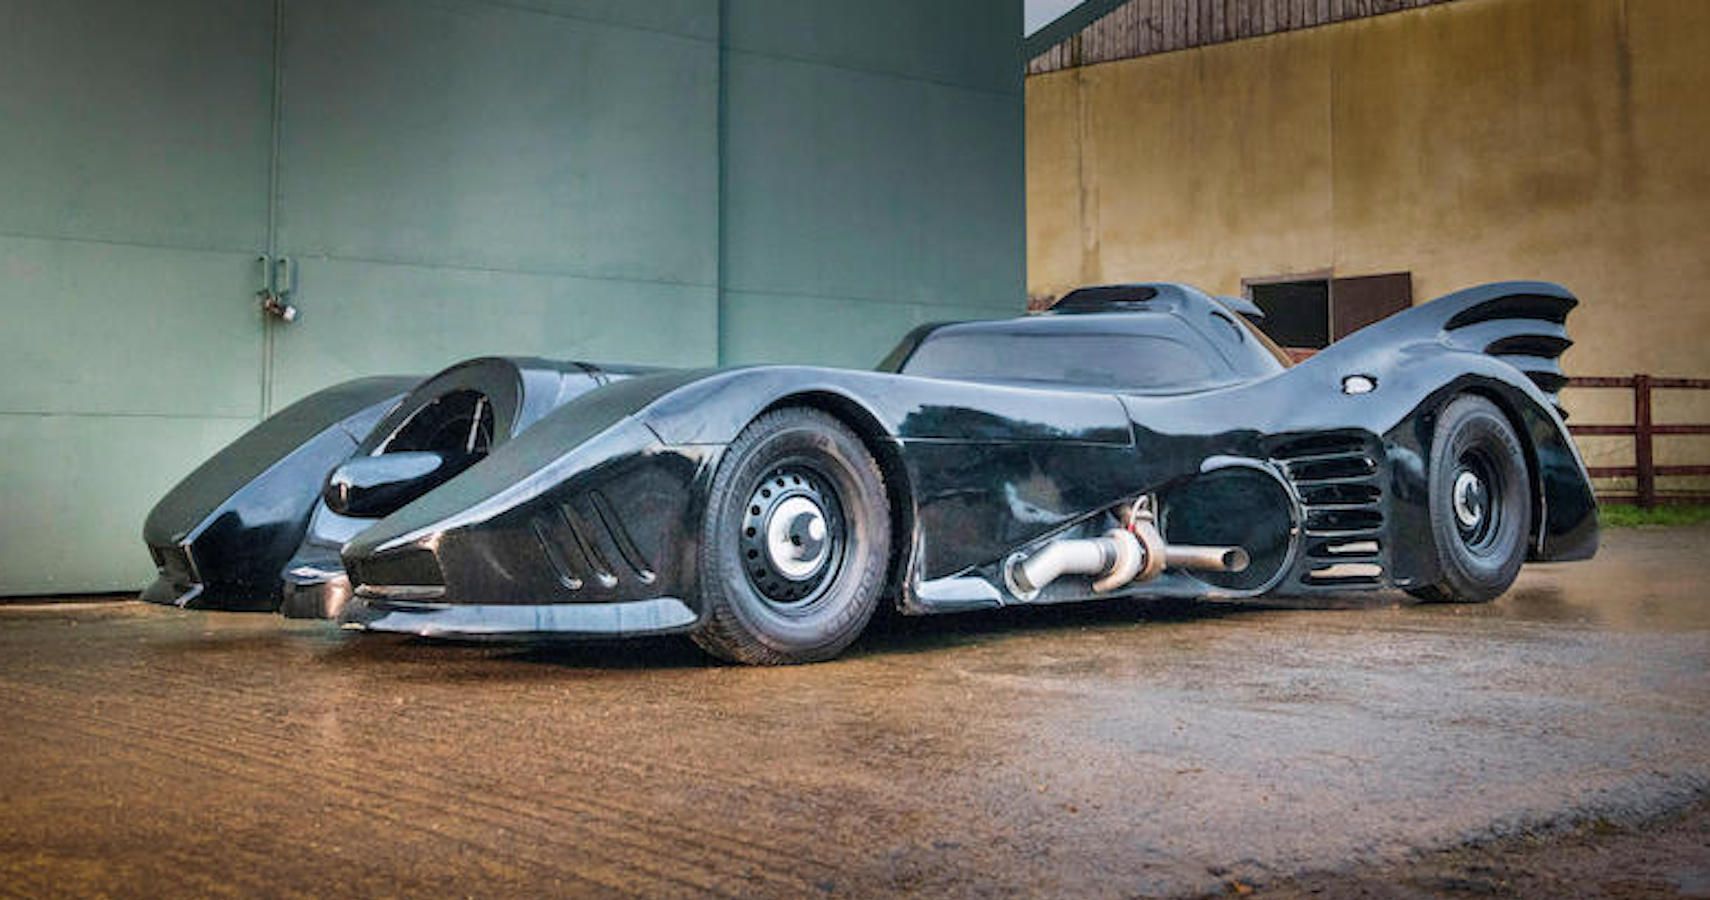 Start Measuring Your Garage To Make Room For This Batmobile Replica Up For Auction